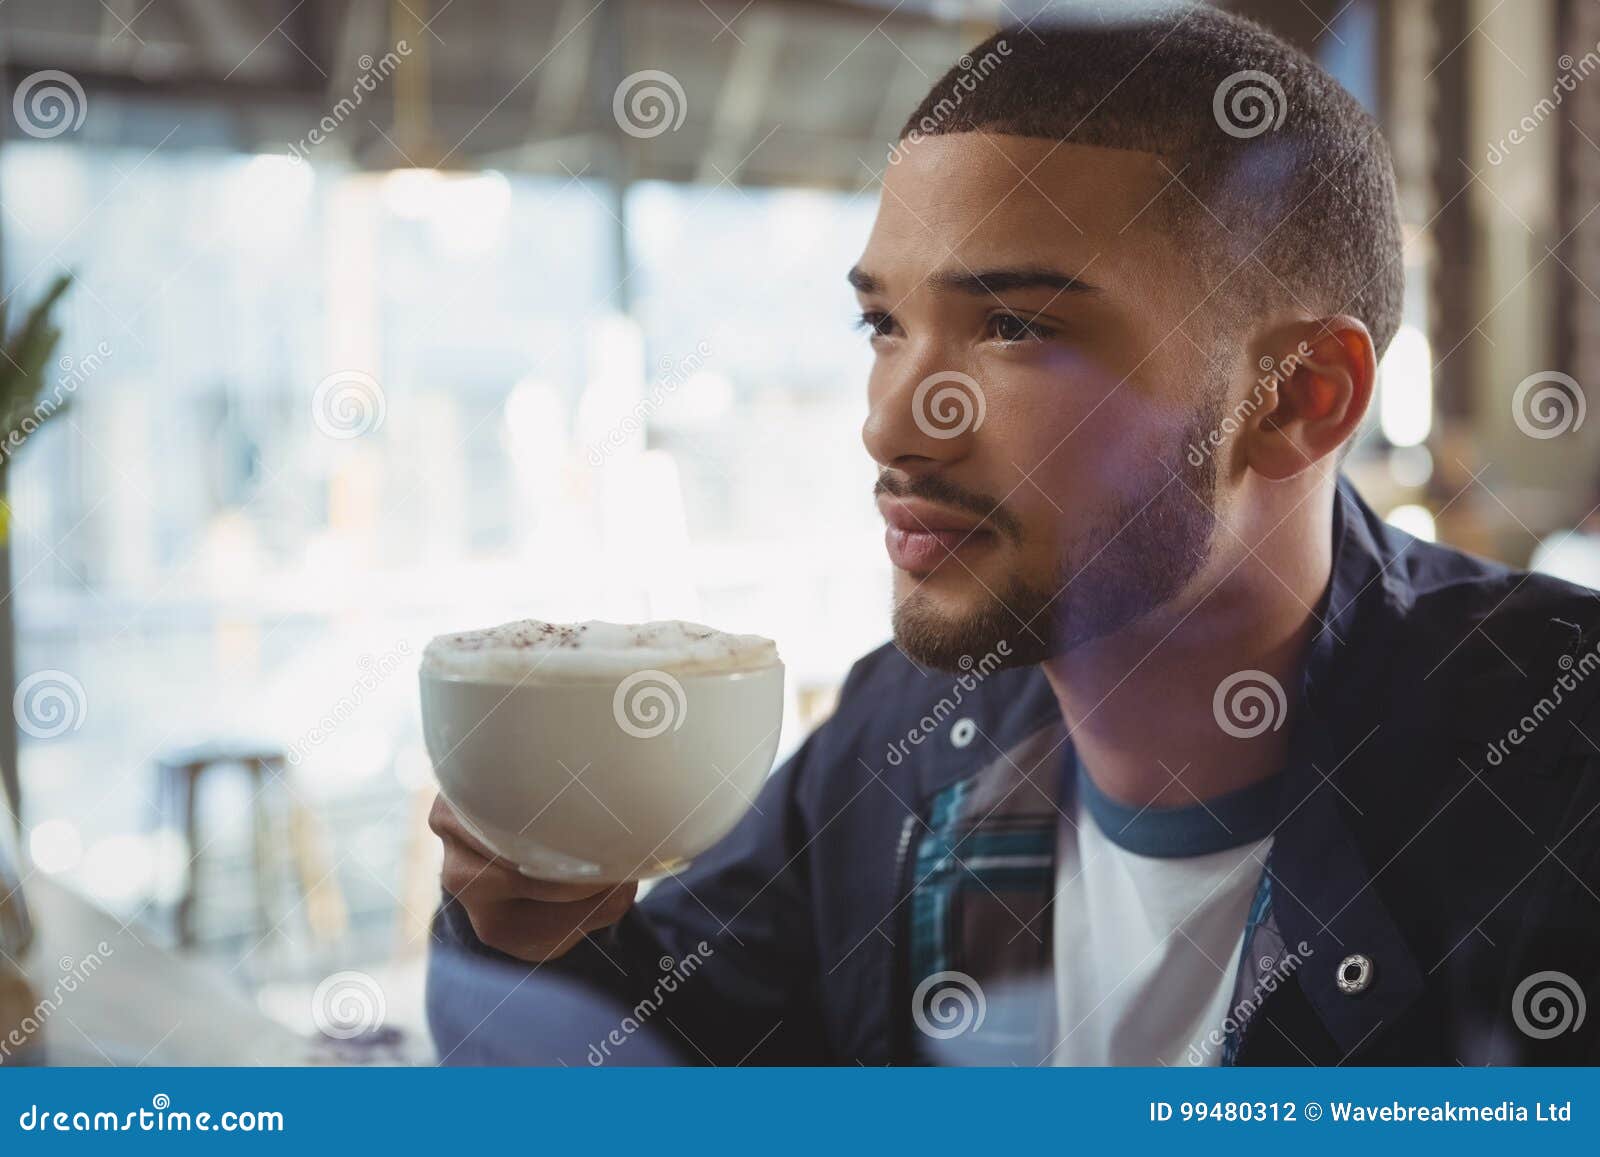 Thoughtful Man Having Coffee In Cafe Stock Photo - Image of holding ...
